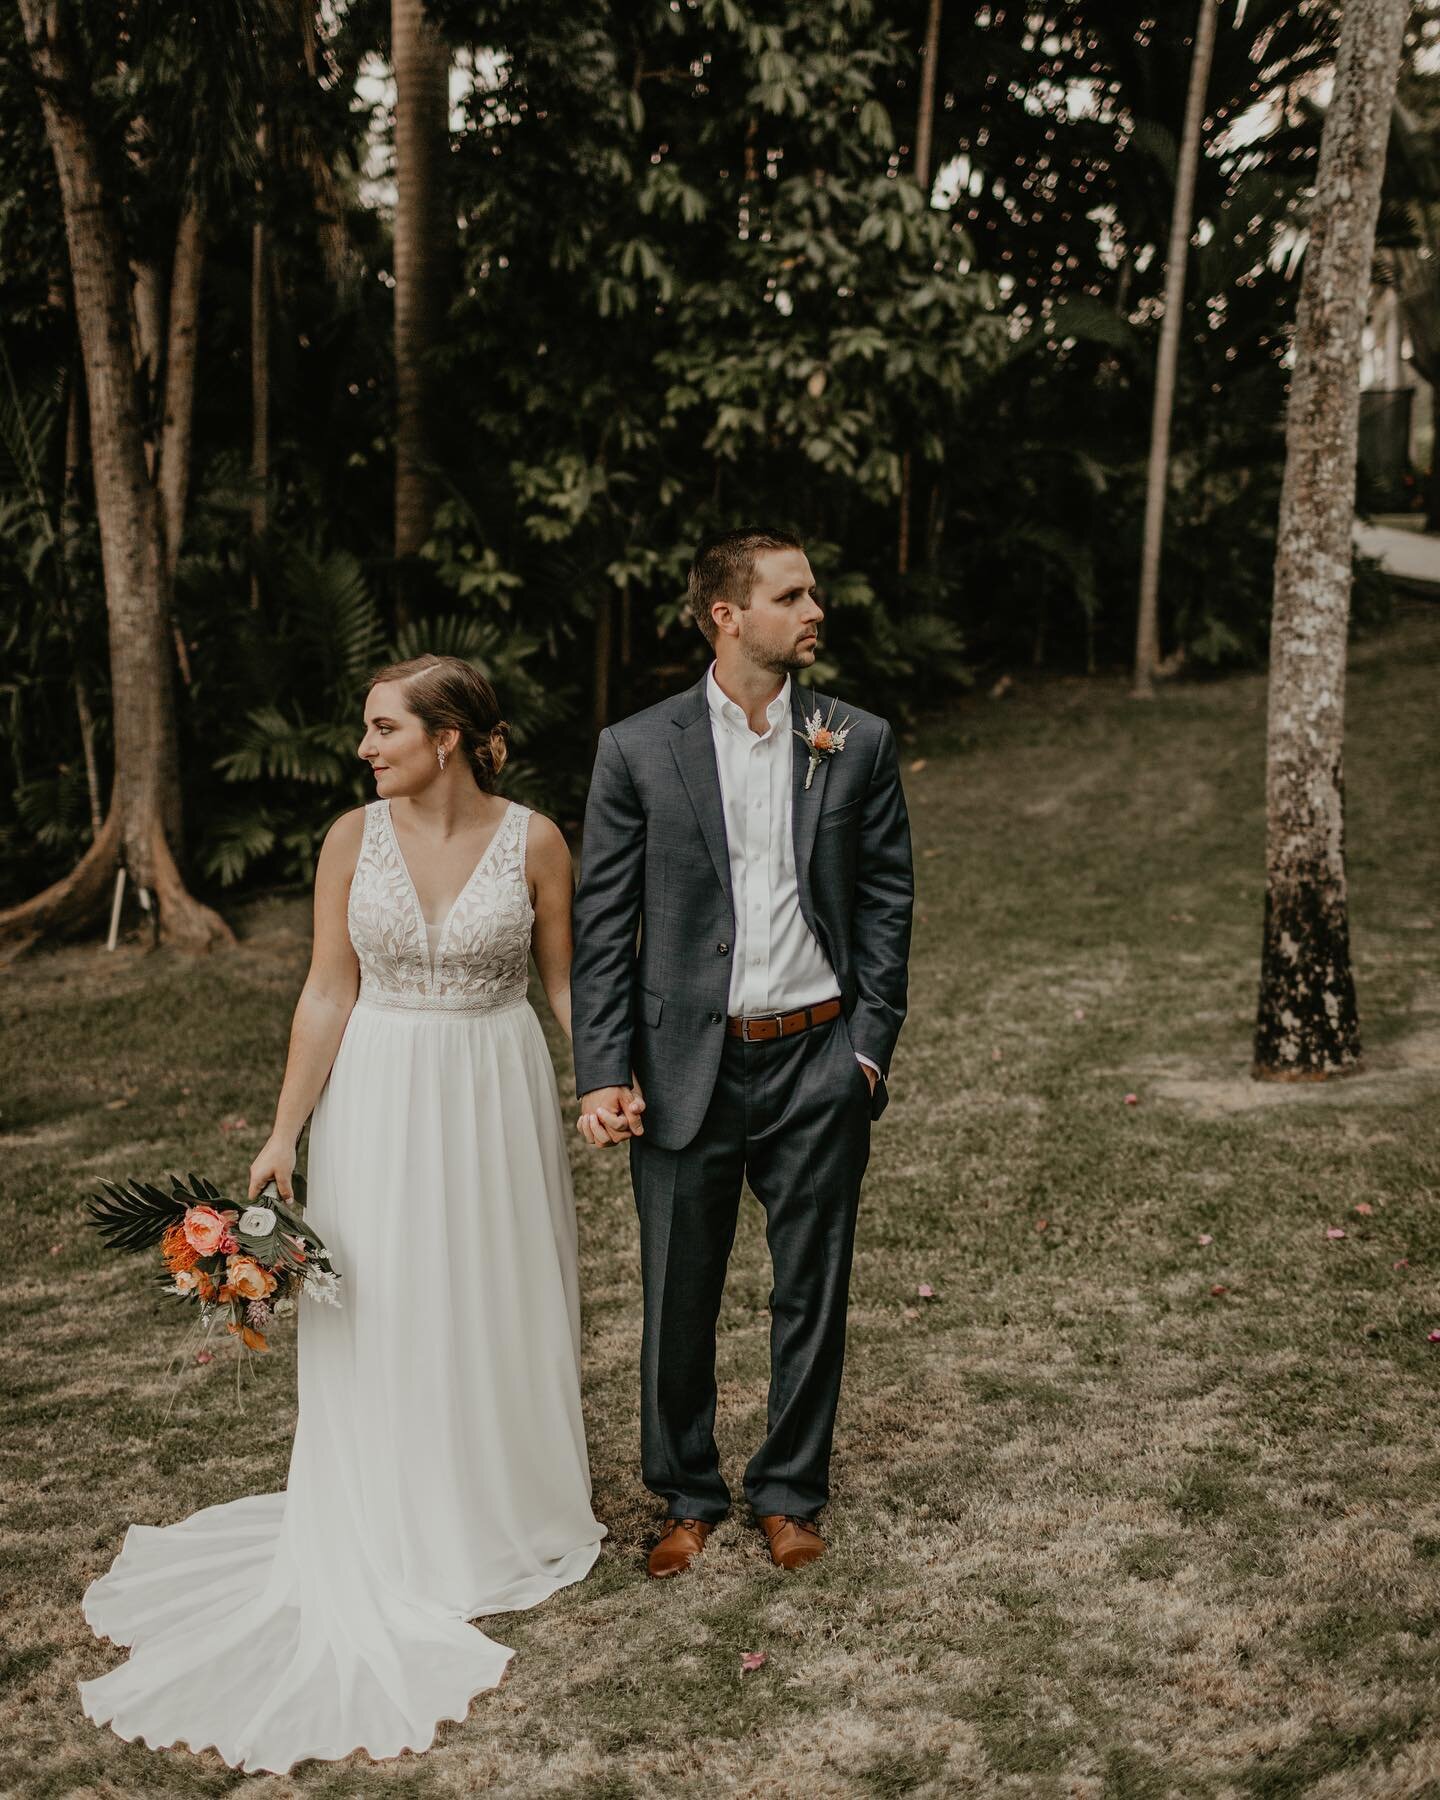 One of my most FAVORITE memories from 2021 was getting asked to photograph a wedding in Jamaica. 🙌🏼✨ @kelly_kimble &amp; @jamied_13 were so kind to invite me and my husband to come along on a trip of a lifetime &amp; we are SO thankful. 🖤 It was S